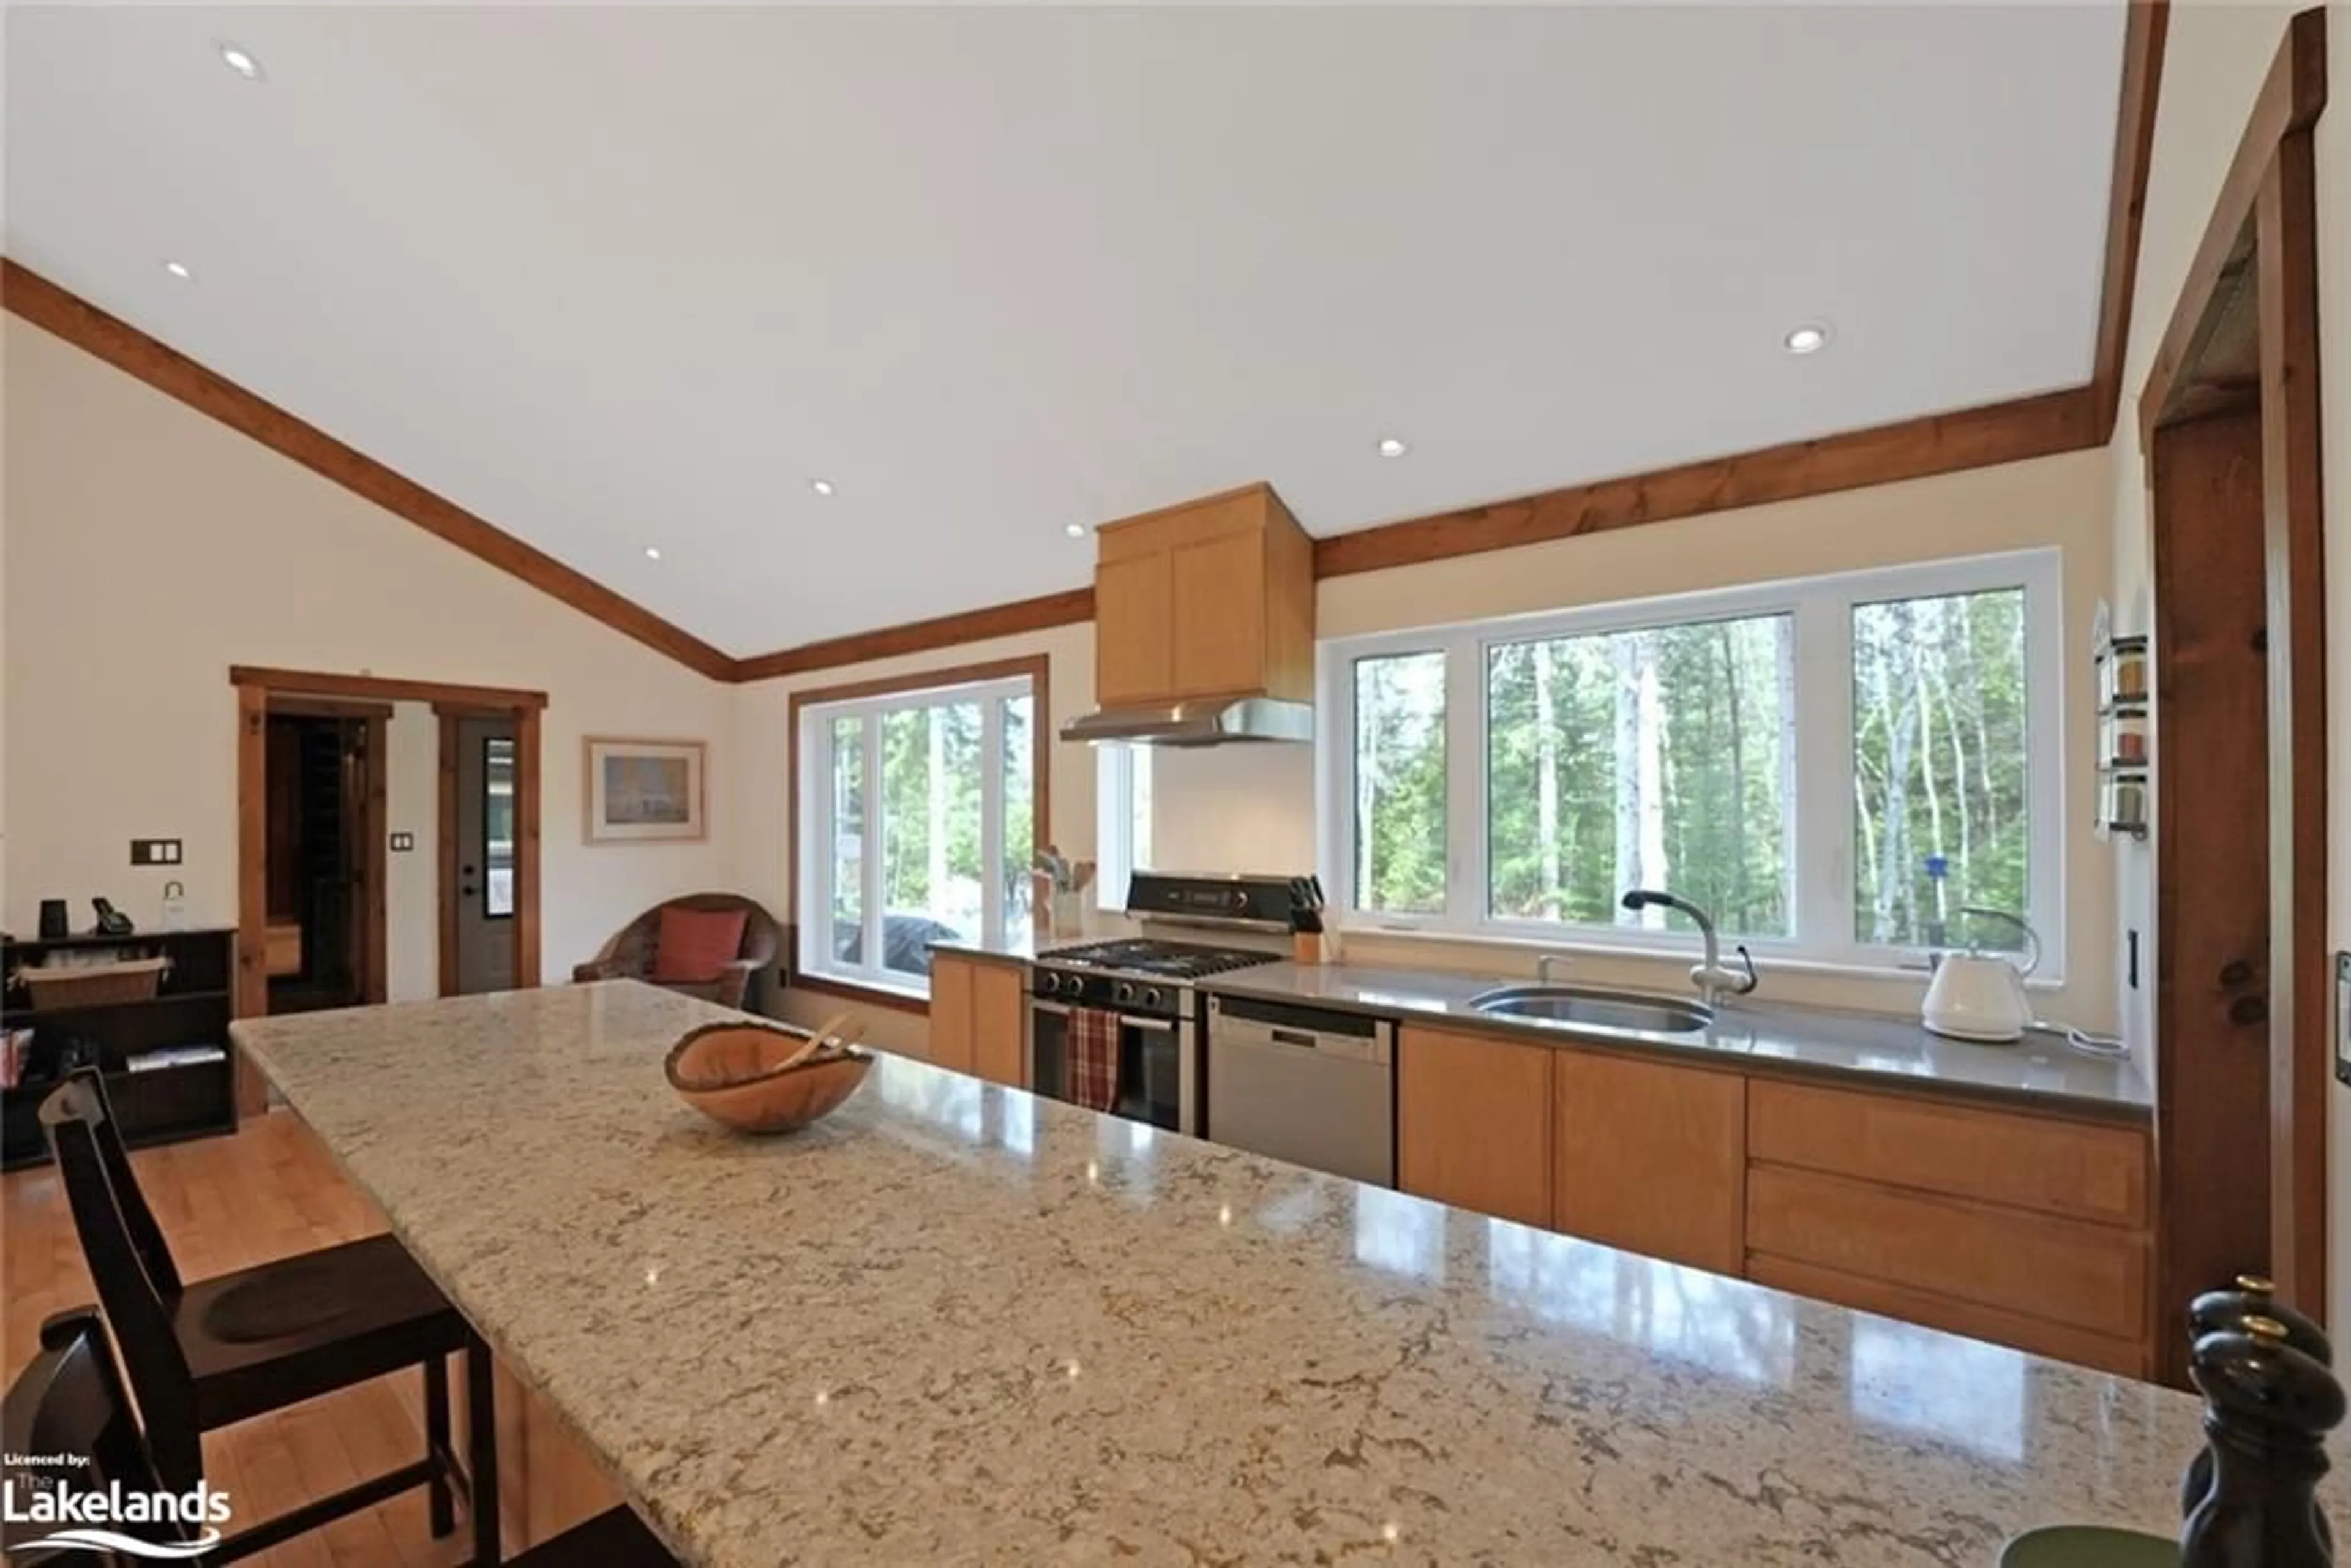 Contemporary kitchen for 1214 Ursa Rd, Highlands East Ontario K0M 1R0